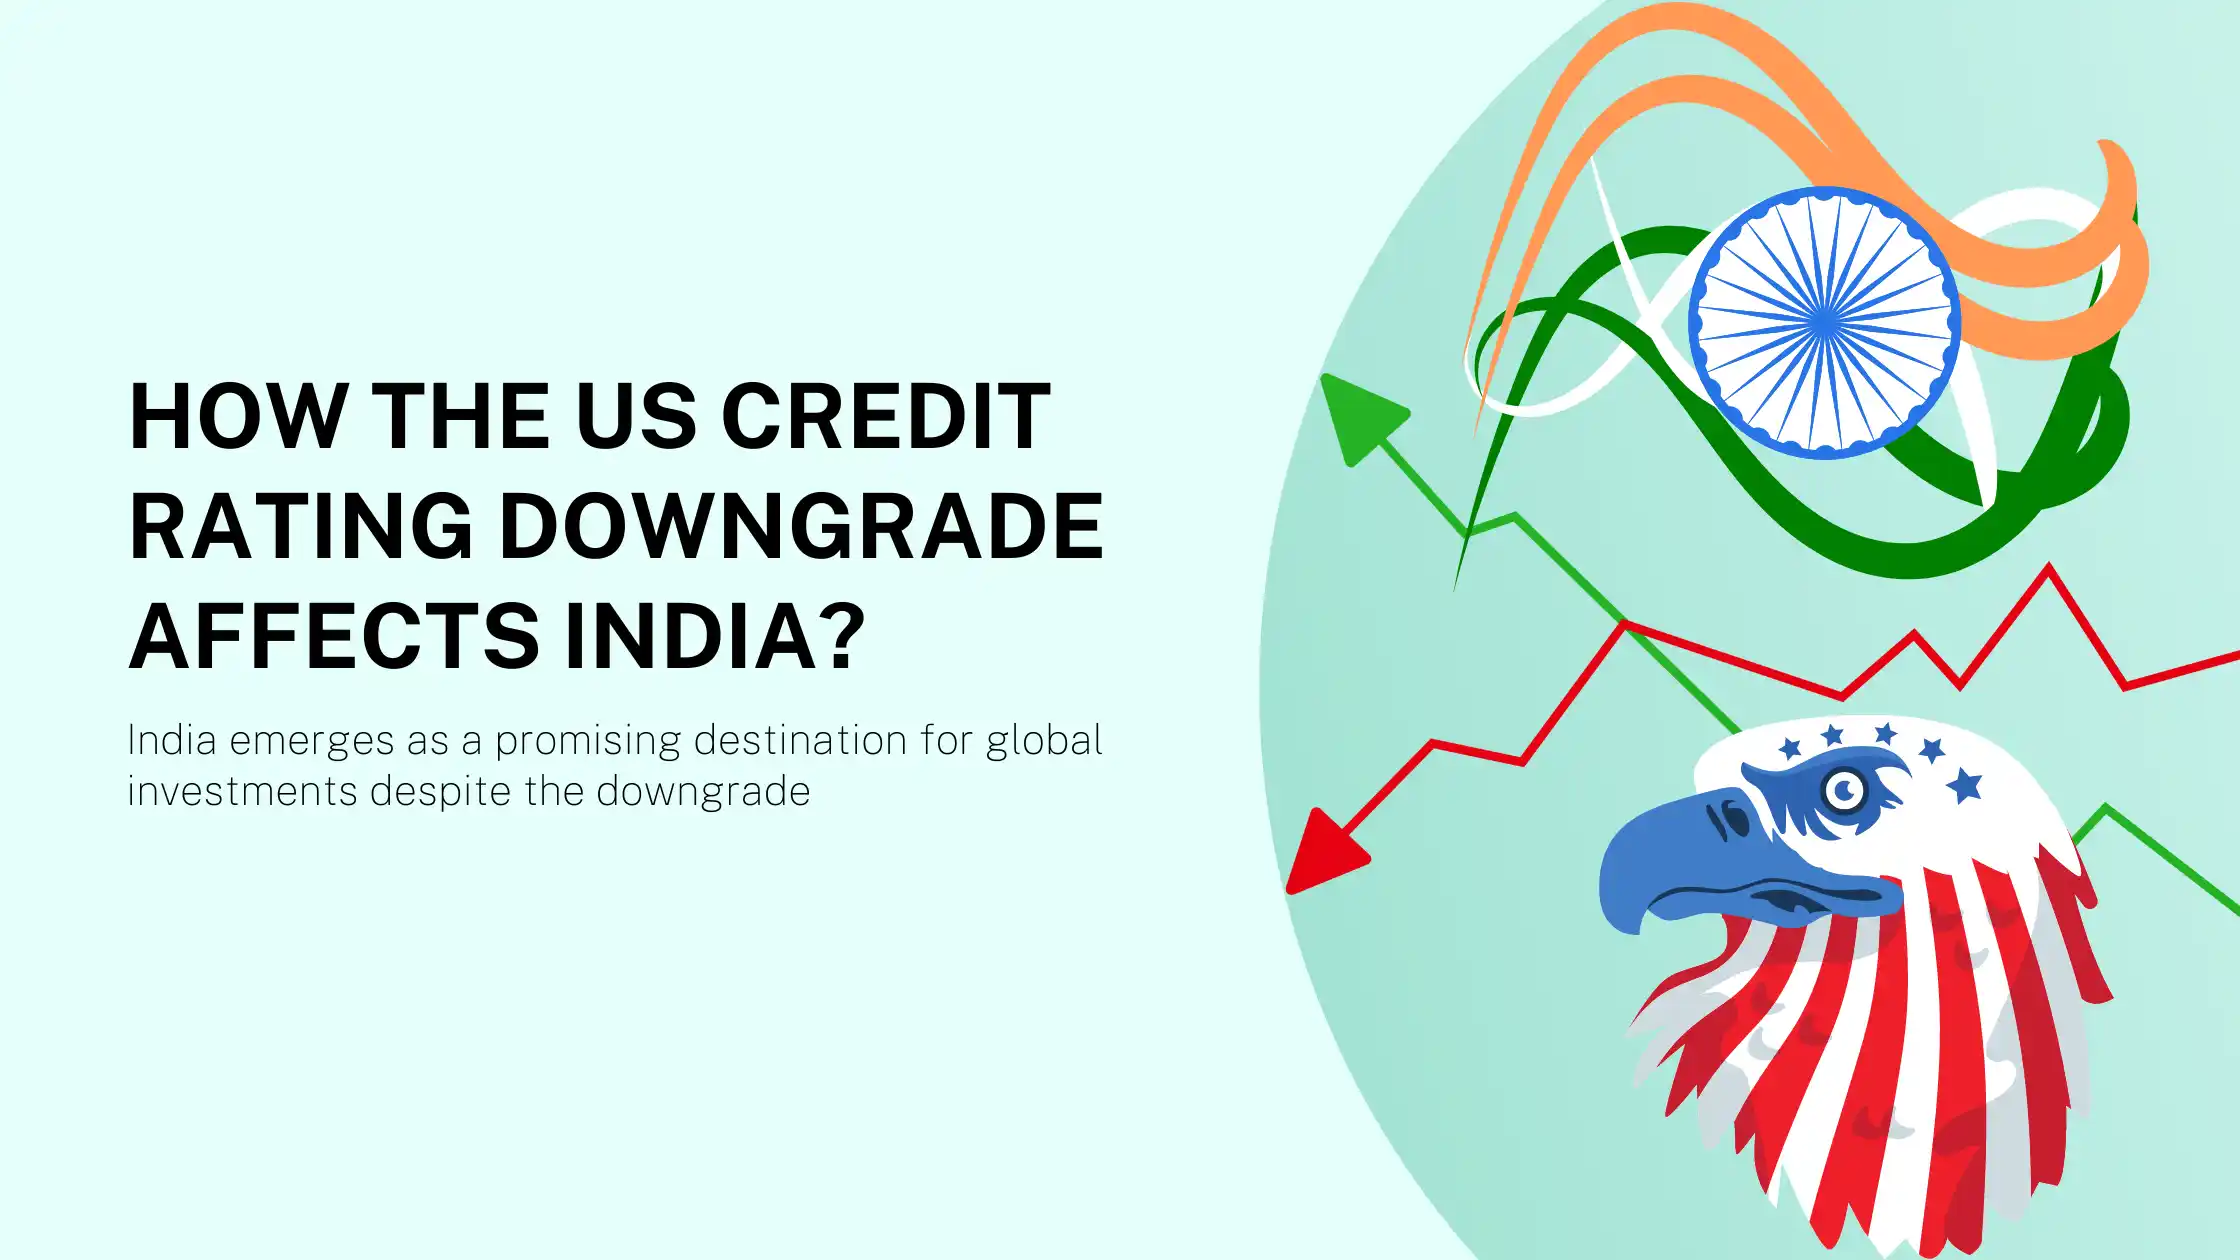 How the US Credit Rating Downgrade Affects India?